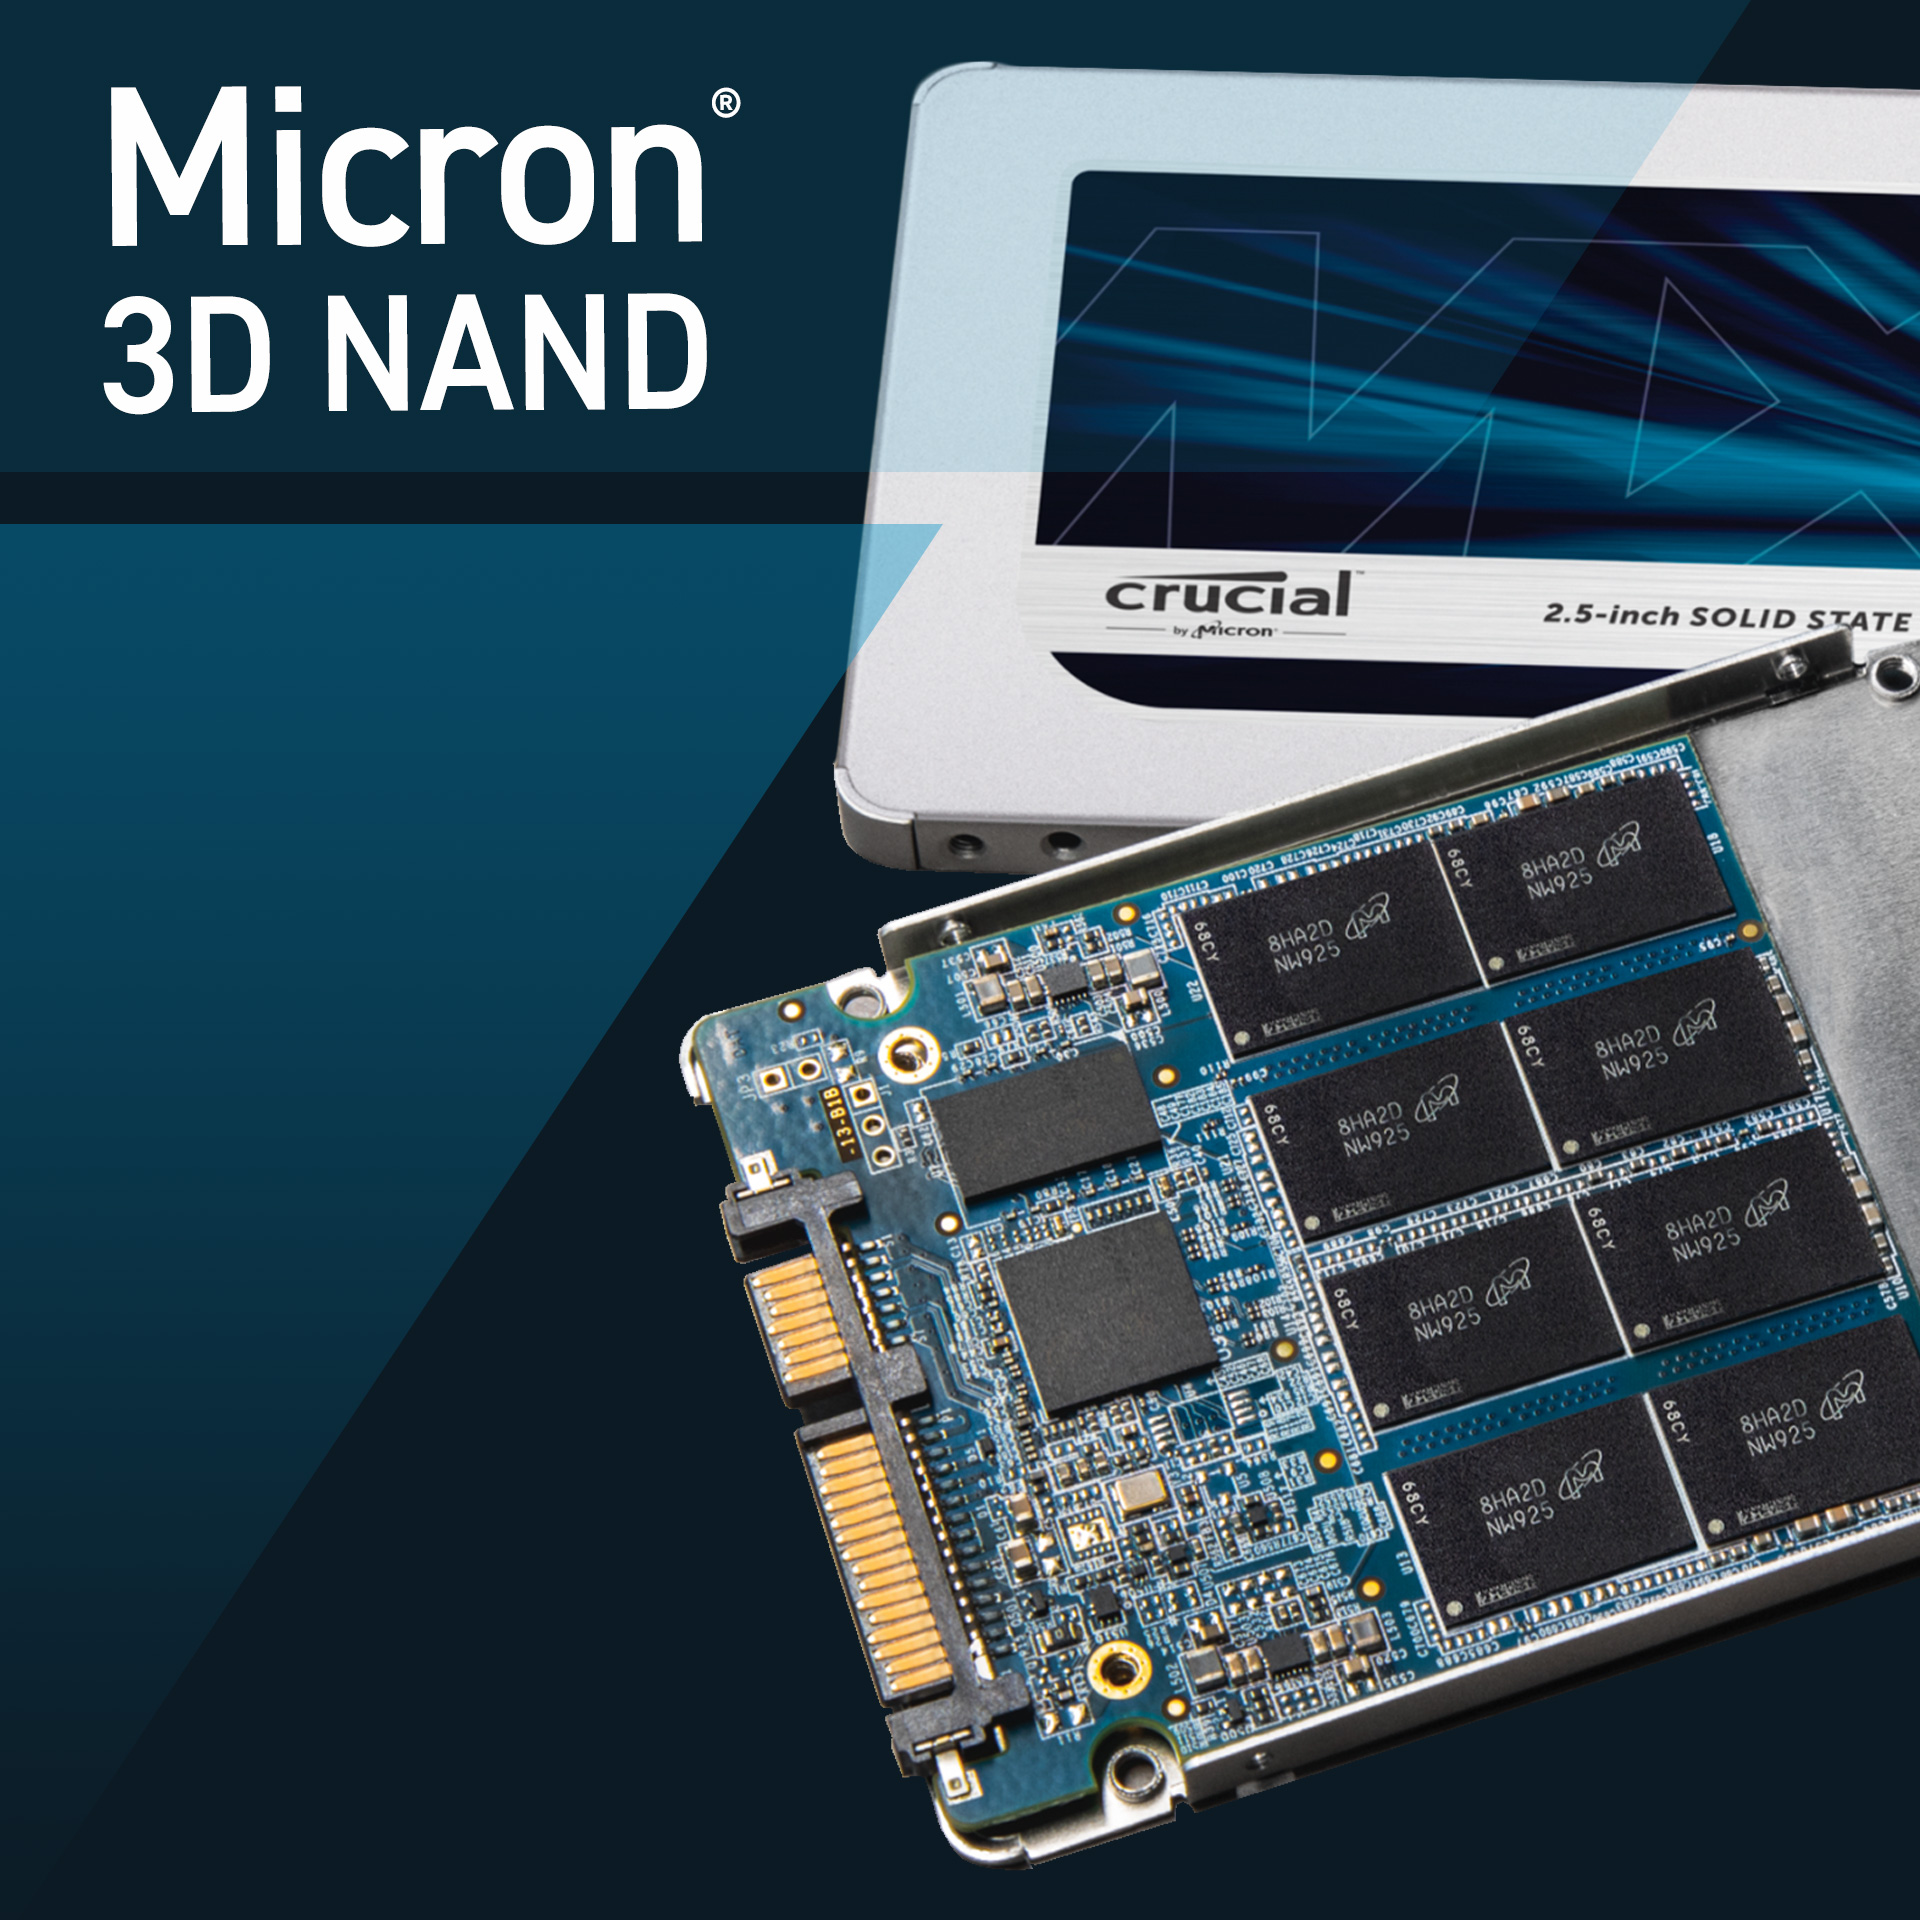 Crucial MX500 4TB 3D NAND SATA 2.5-inch 7mm (with 9.5mm adapter) Internal SSD- view 6